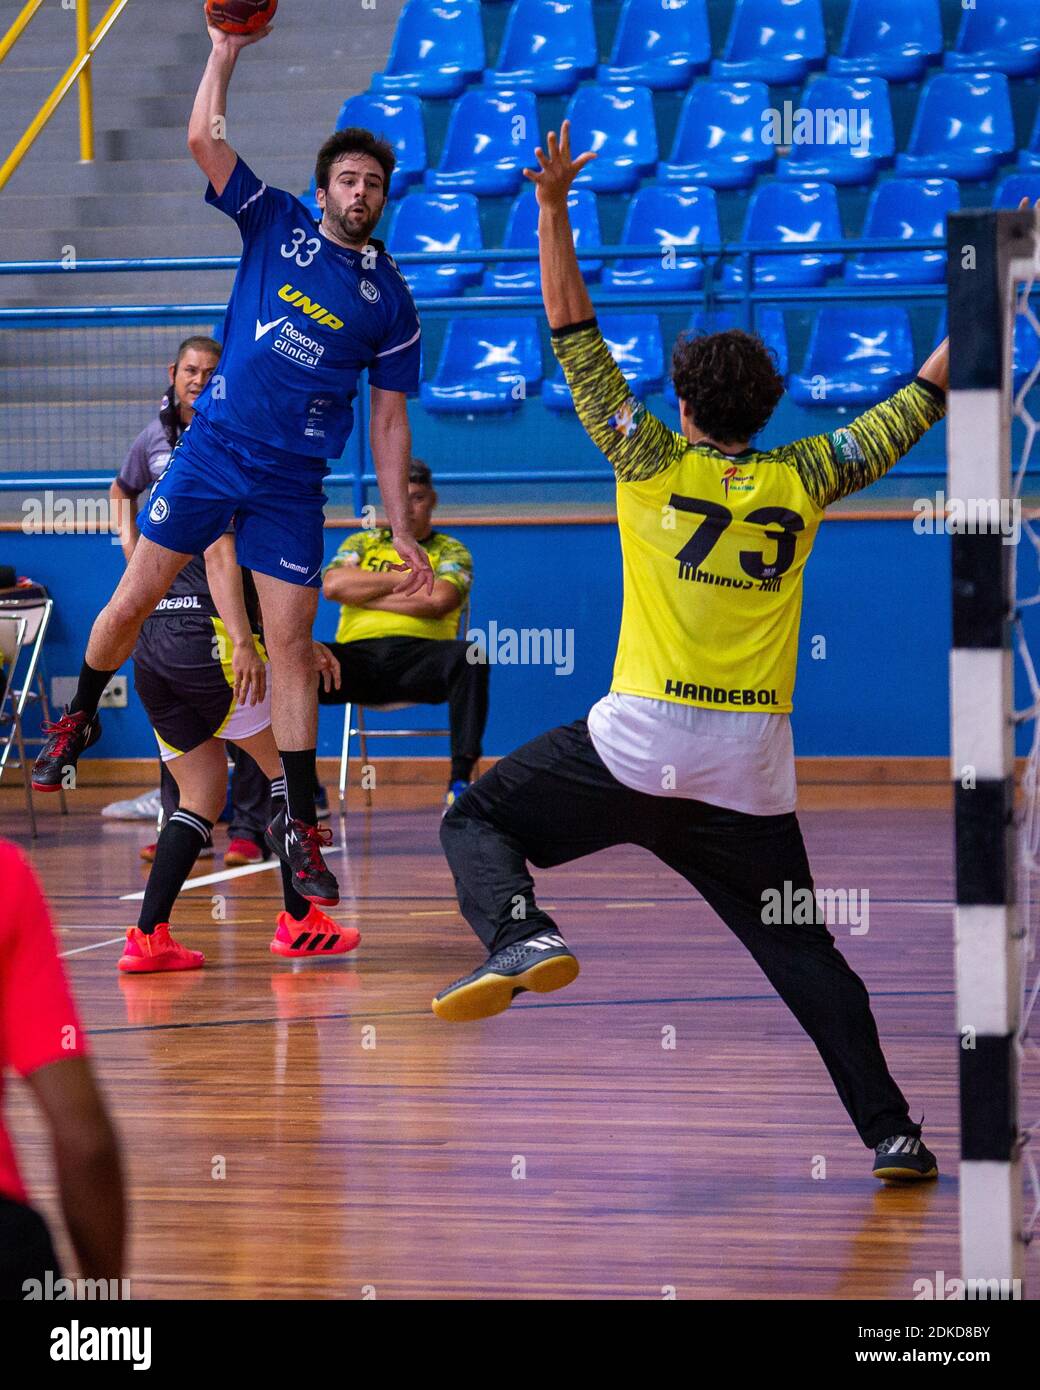 ARUJÁ, SP - 15.12.2020: 1 DIA DA LIGA NACIONAL DE HANDEBOL 2020 - Luis Palma Guardia of the ECP covering the goalkeeper of Manauense. Match between EC Pinheiros (SP) x Manauense (AM) of the 1st Round of the Classification Phase of the National Men&#39;s Handball League 2020. This year&#39;s competition will be in the form of a &quot;bubble&quot;, even used in the NBA, with isolation zone, protocols control systems and all 12 teams will be tested for Covid-19. On December 15th, 2020 at Perfect Liberty in Arujá (SP). (Photo: Bruno Ruas/Fotoarena) Stock Photo